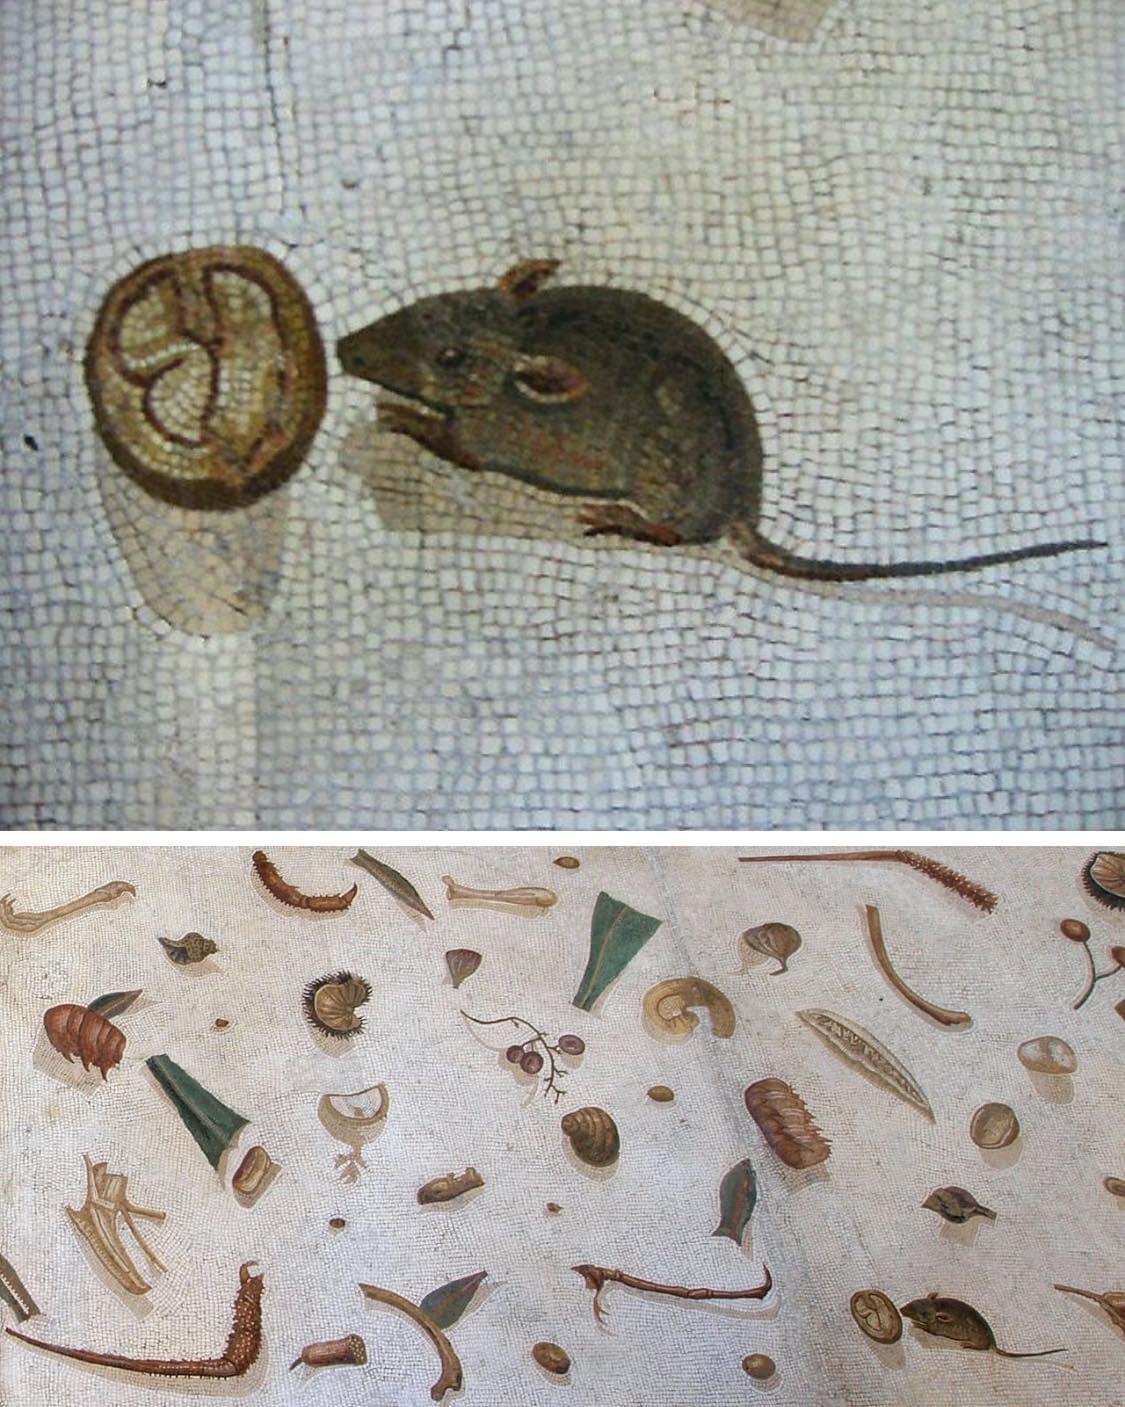 Detail from the 'unswept floor' mosaic made by Heraclitus, showing a mouse eating a walnut. 2nd century CE, now on display at the Vatican Museums.jpeg